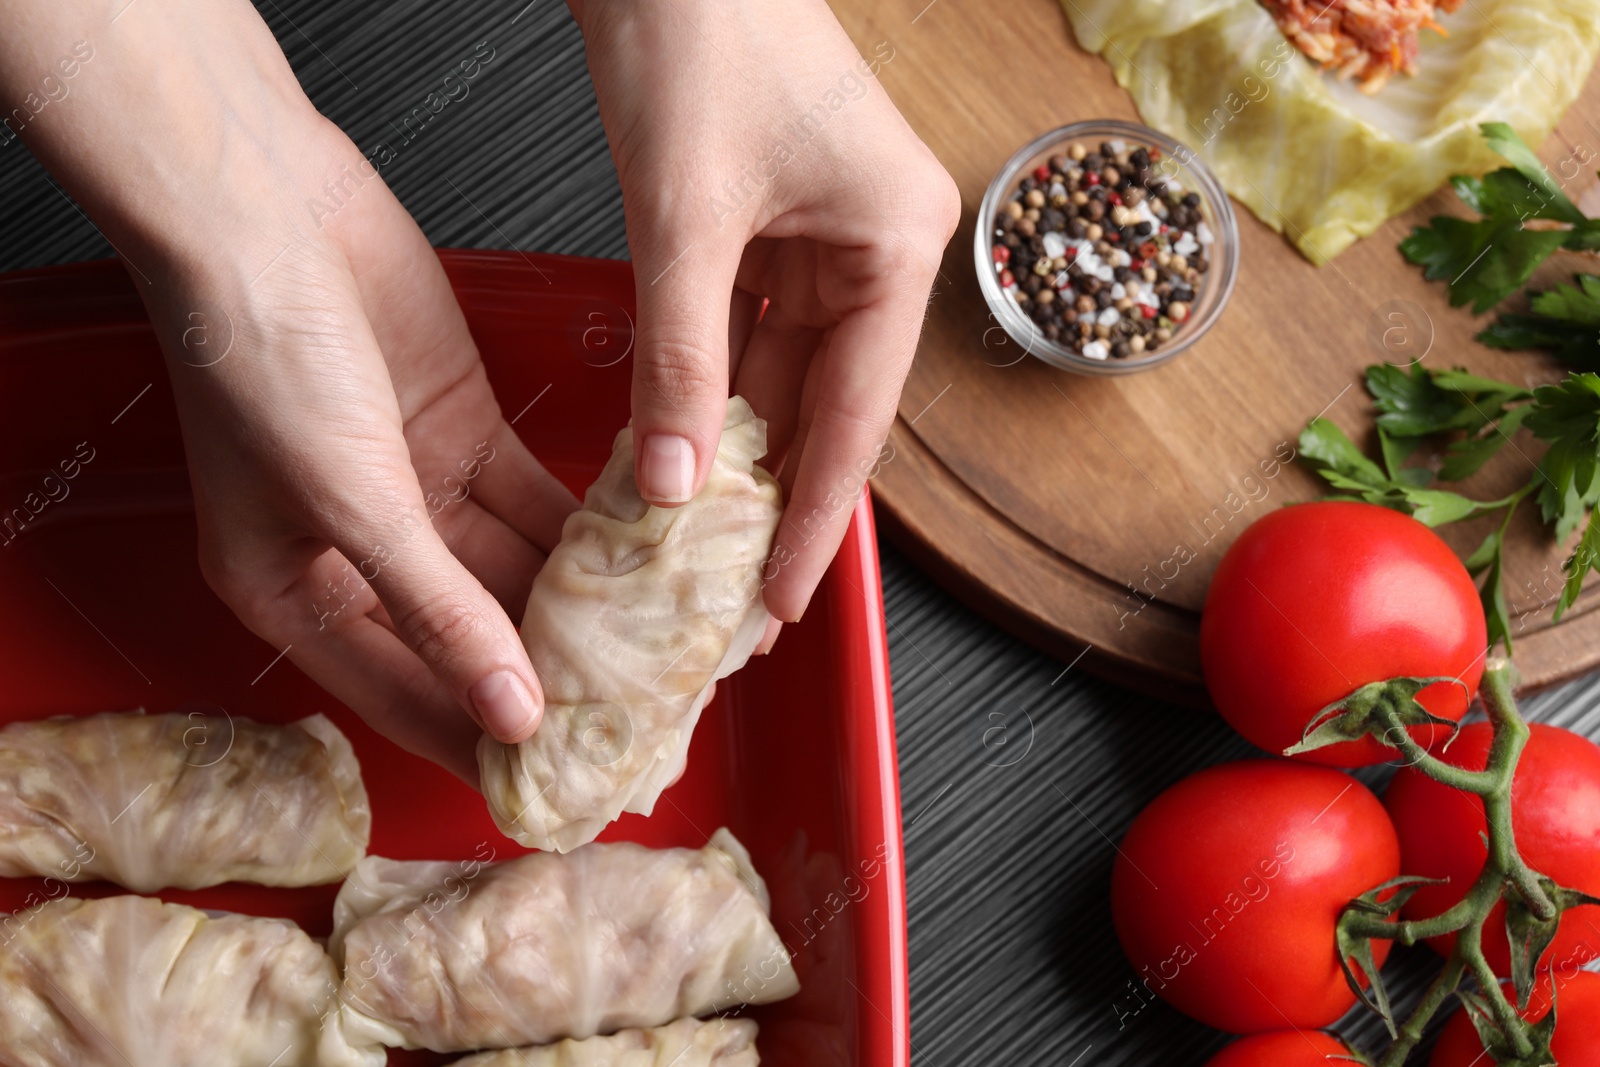 Photo of Woman putting uncooked stuffed cabbage roll into baking dish at black table, top view